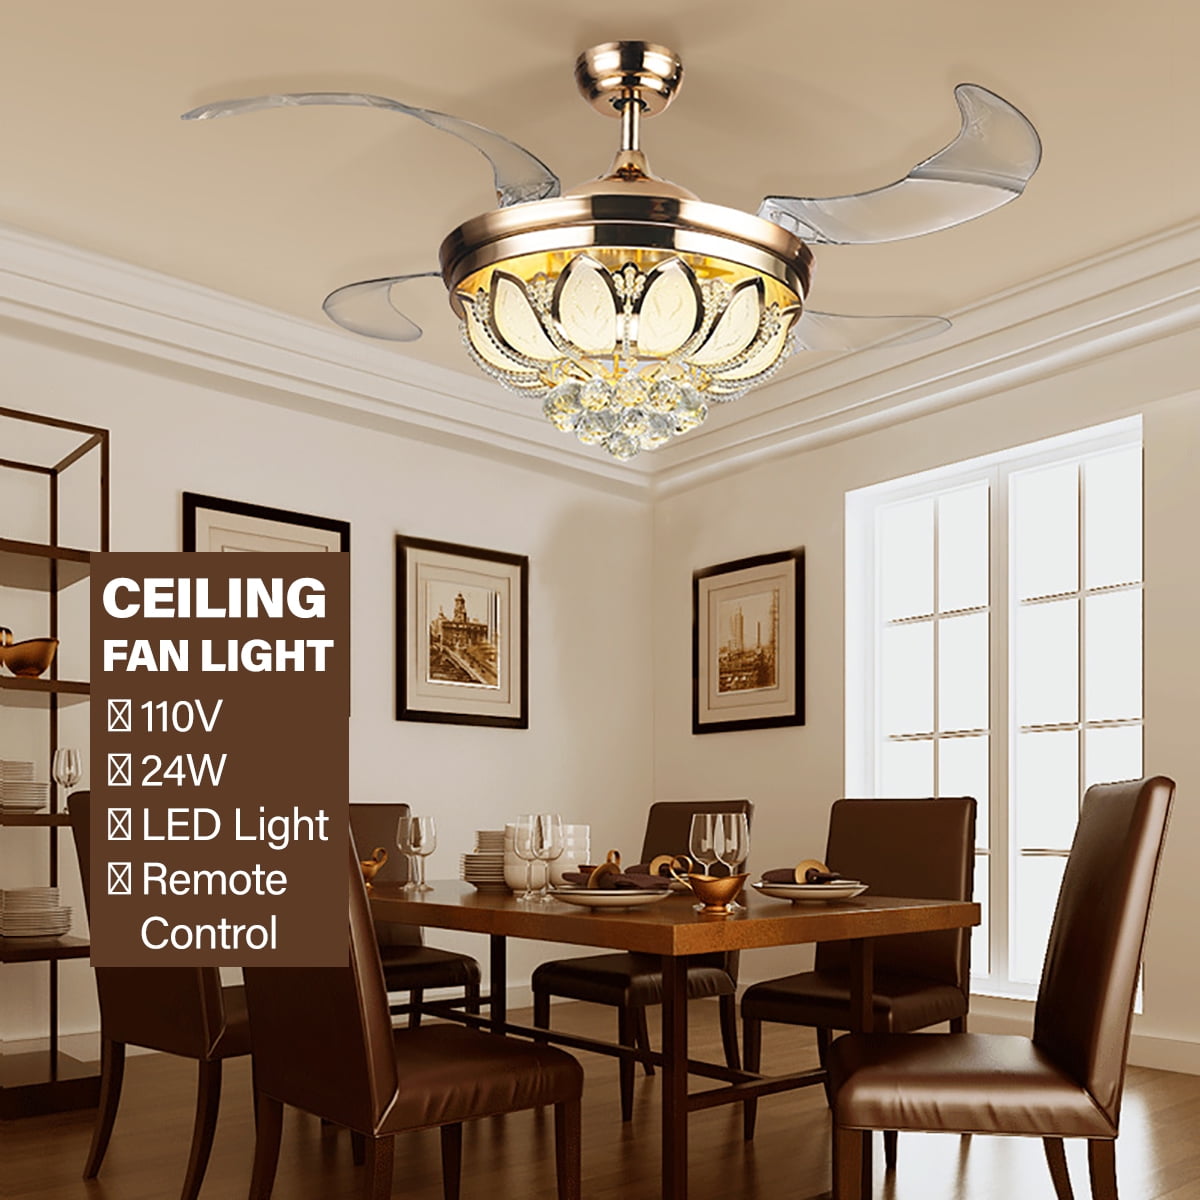 Crystal Ceiling Fan With Lights And, Ceiling Fan Or Chandelier In Dining Room